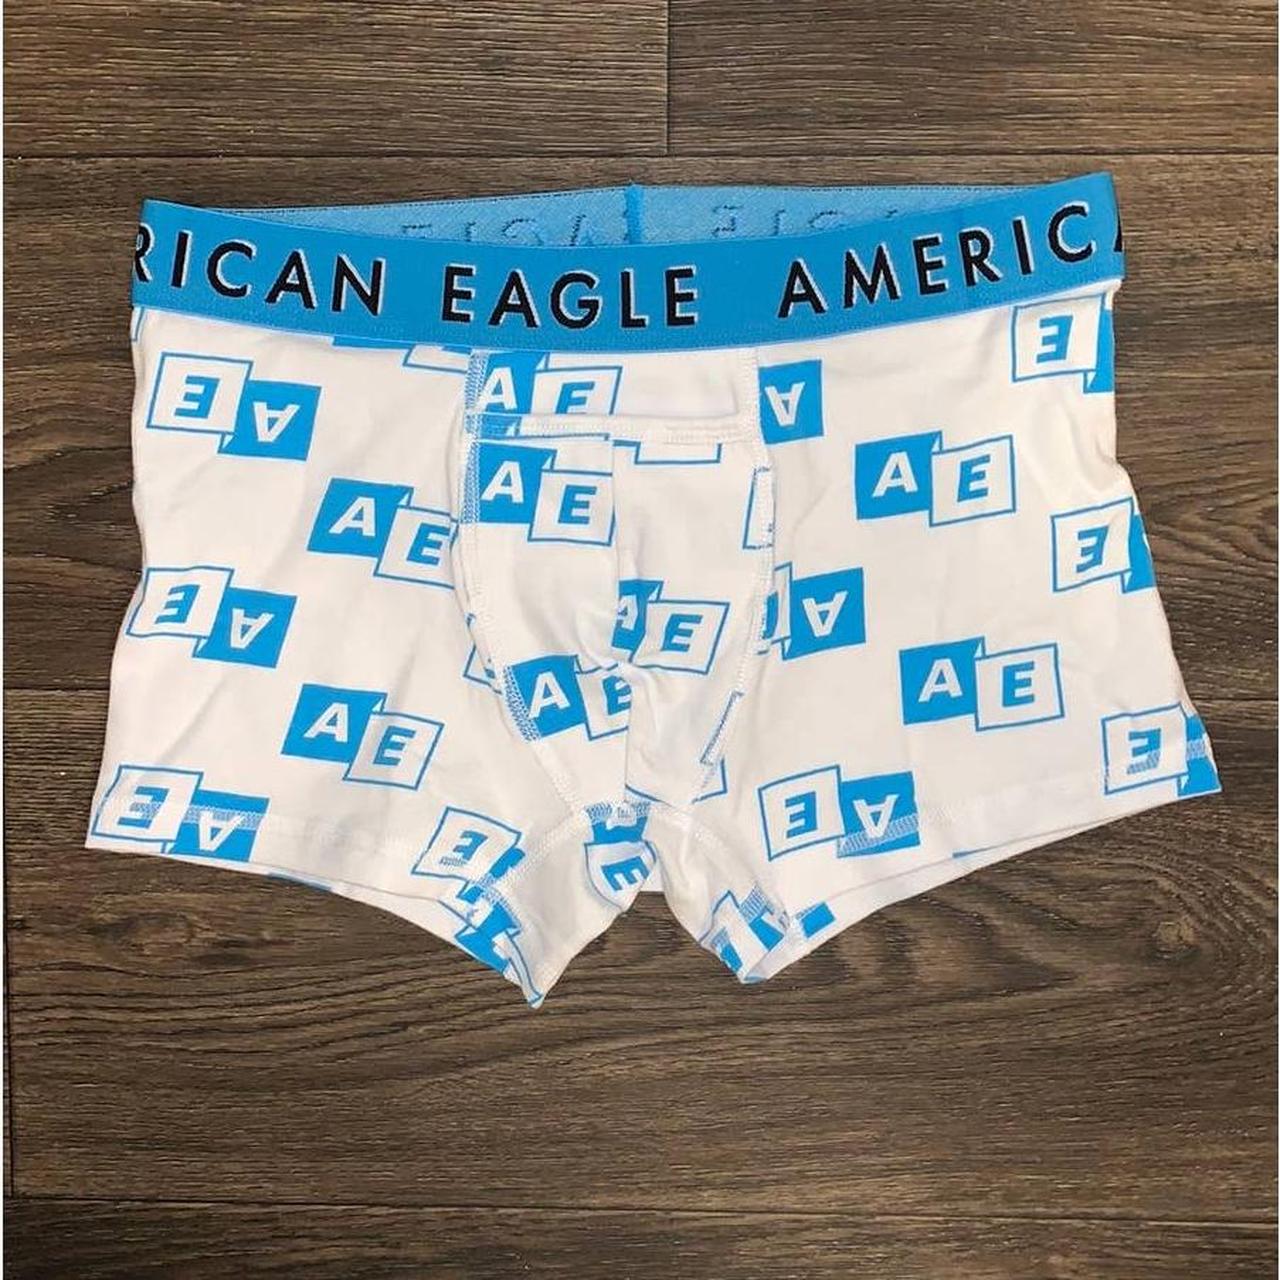 NWOT American Eagle Trunks Size Small - Depop